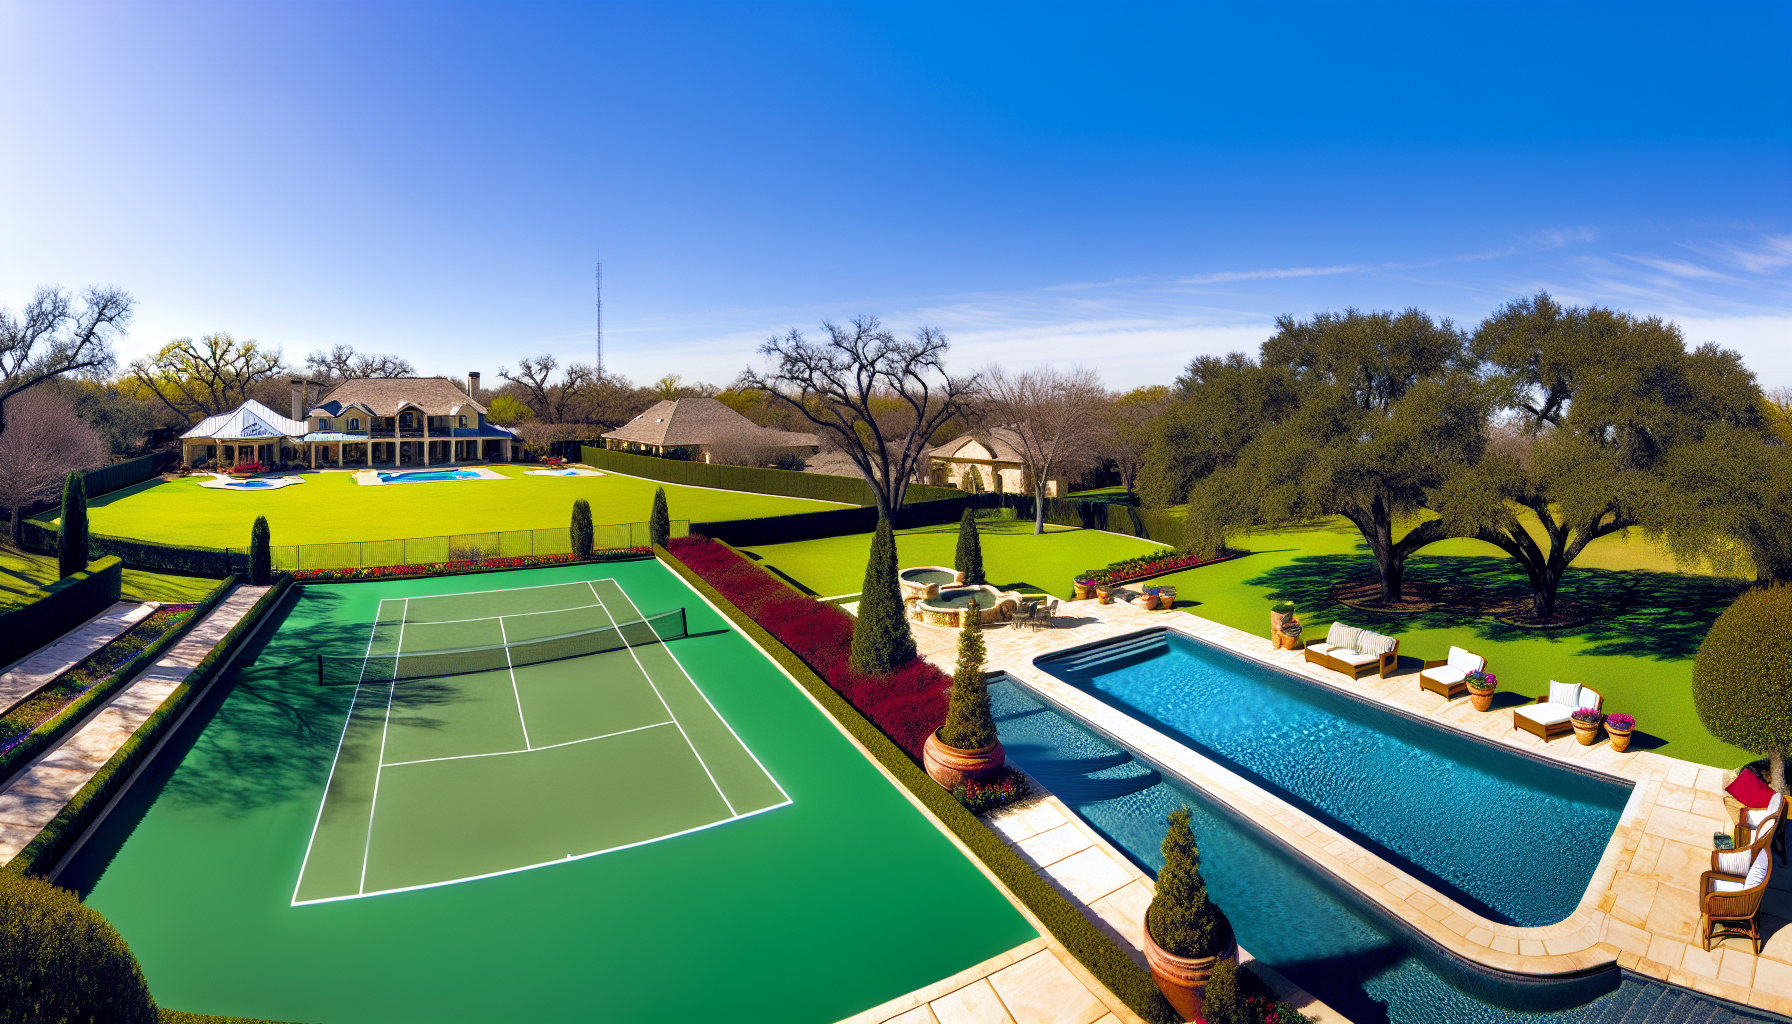 Expansive outdoor living area with a tennis court and pool